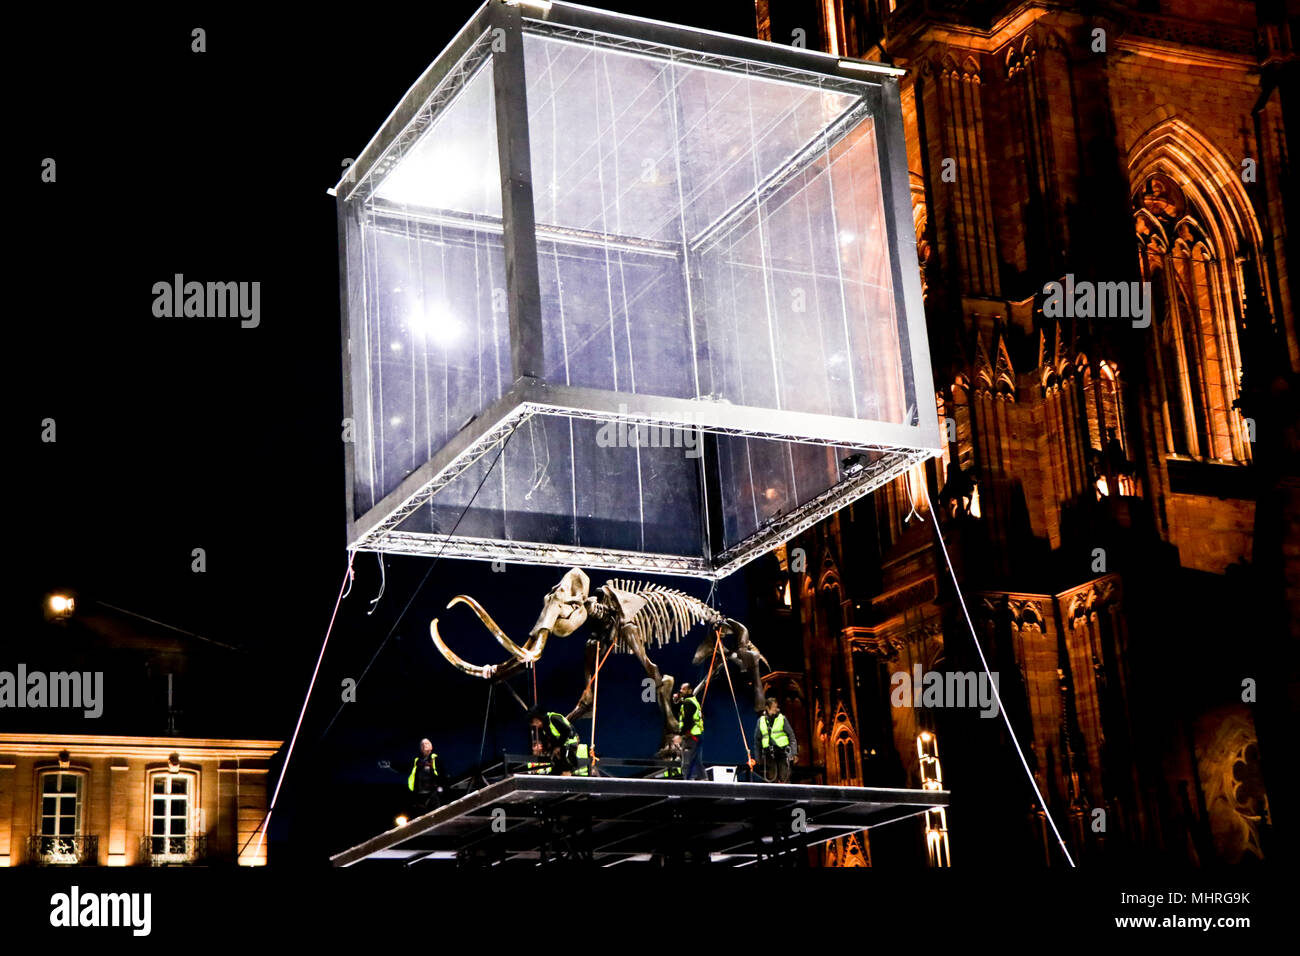 Jacques Rival’s installation 'Mammuthus Volantes' (Flying Mammoth) seen being lifted by a crane to be placed next to the water fountains in Cathedral Square in Strasbourg during the 'Industrie Magnifique' festival. The complete mammoth skeleton was acquired at an auction by the company ‘Soprema’ and its size are 3.4 metres in length, 5.4 metres in height and its weighs is around 1400 kilograms. Stock Photo